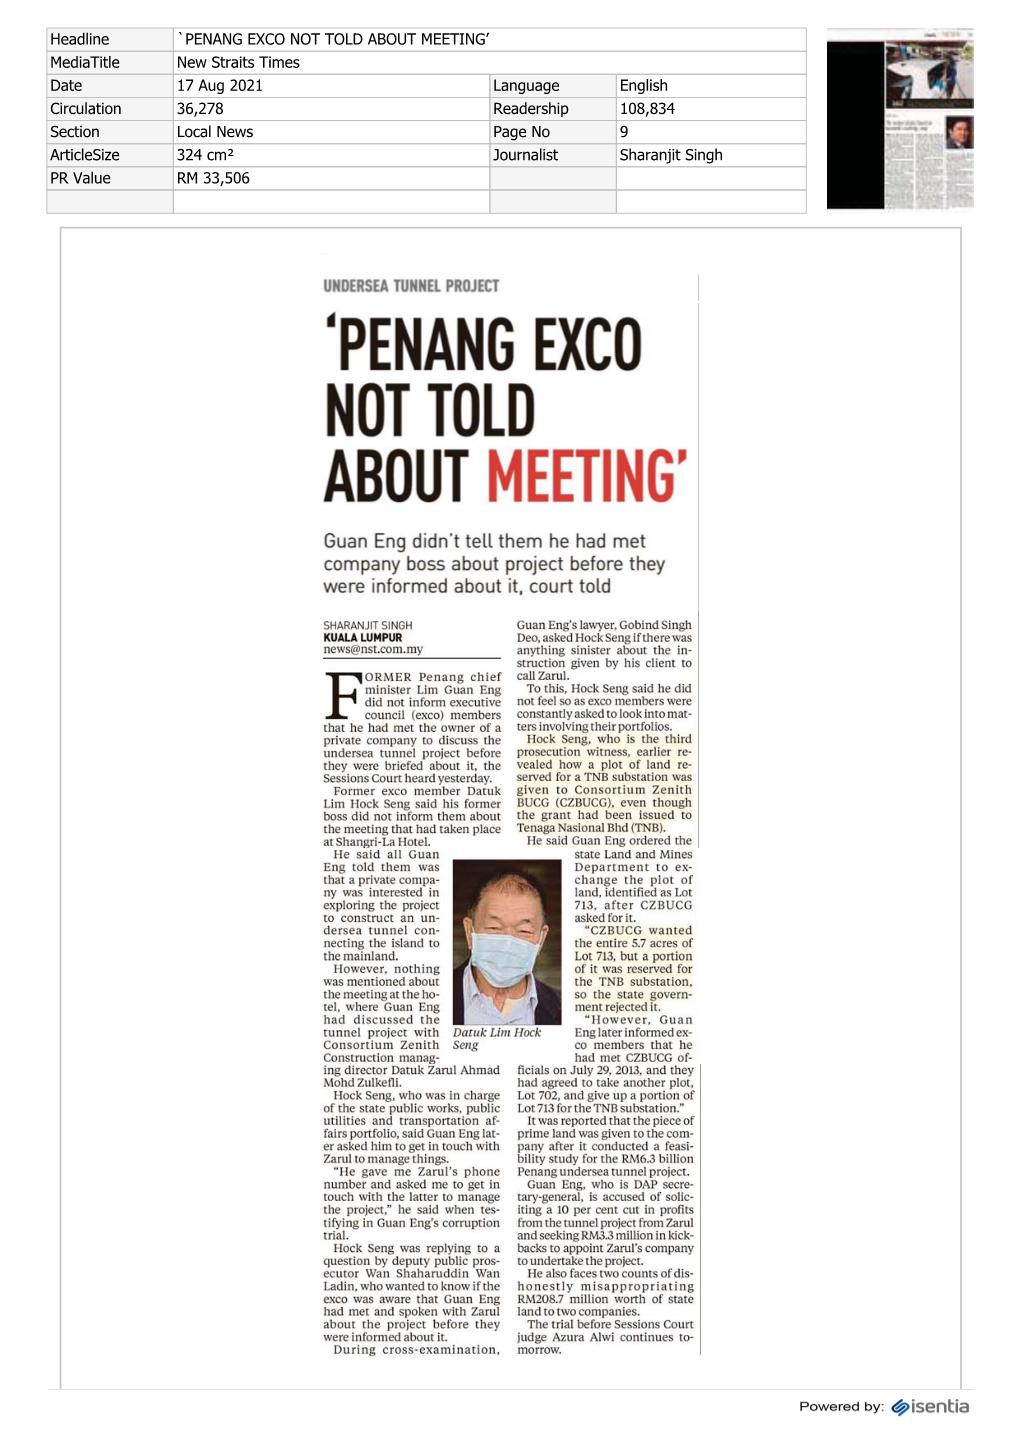 'Penang Exco Not Told About Meeting'